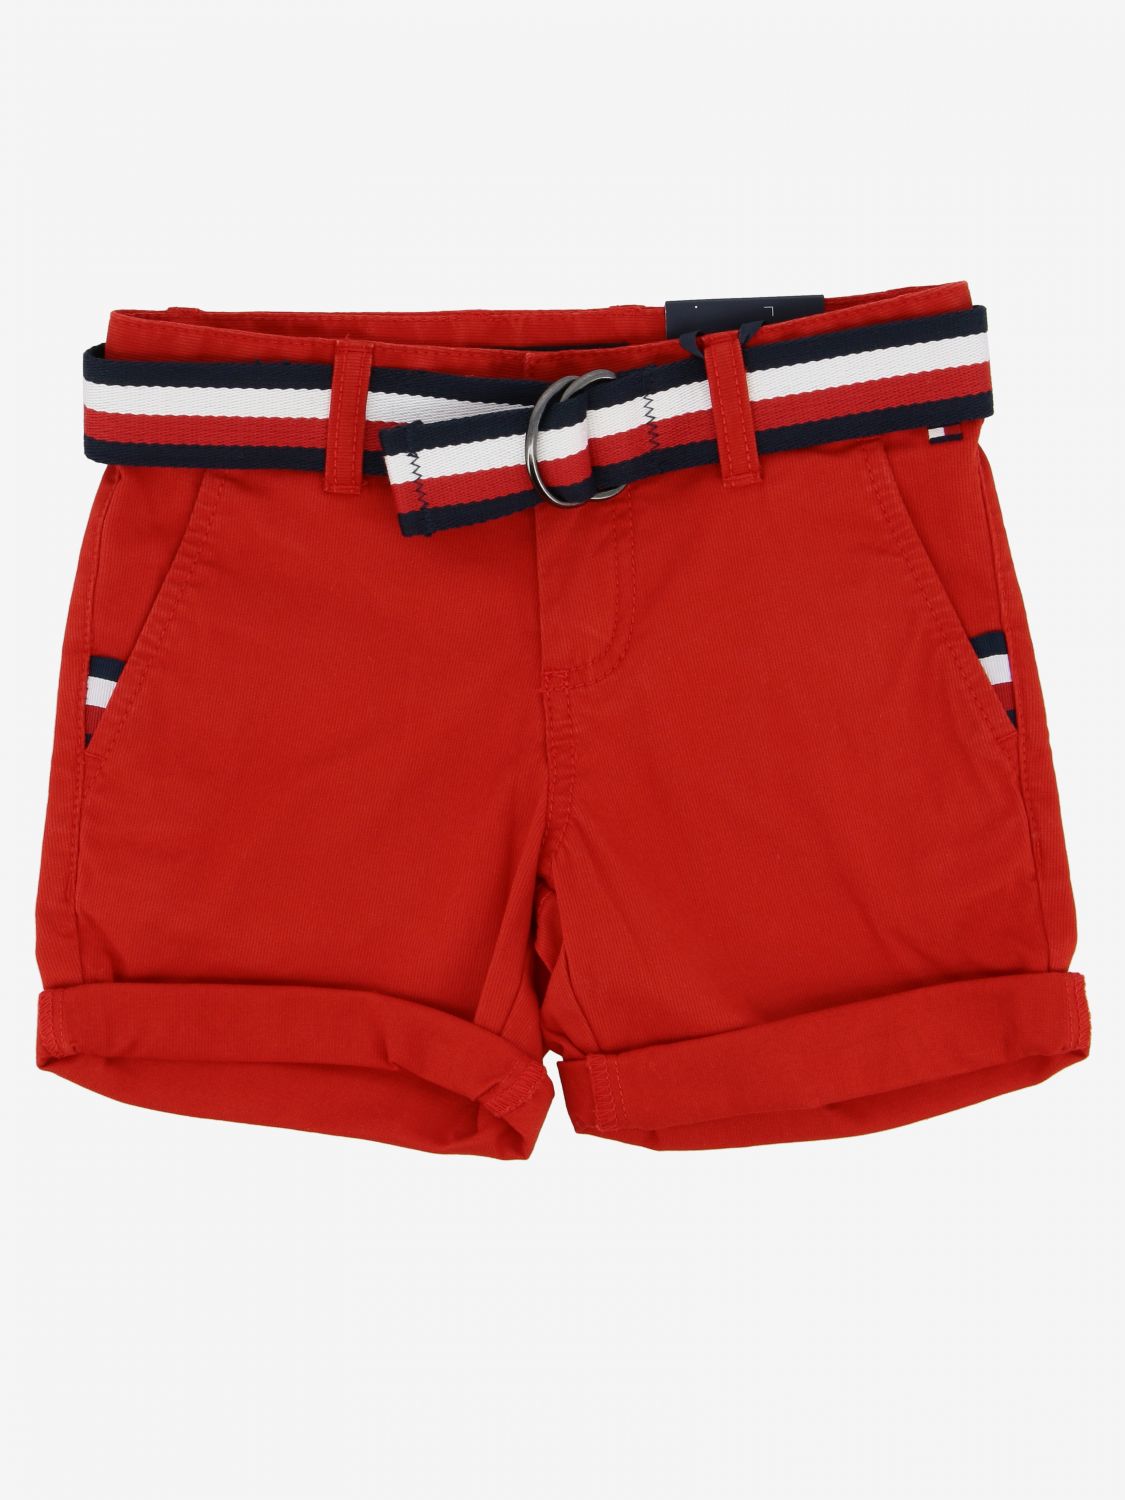 Buy > tommy hilfiger outlet shorts > in stock